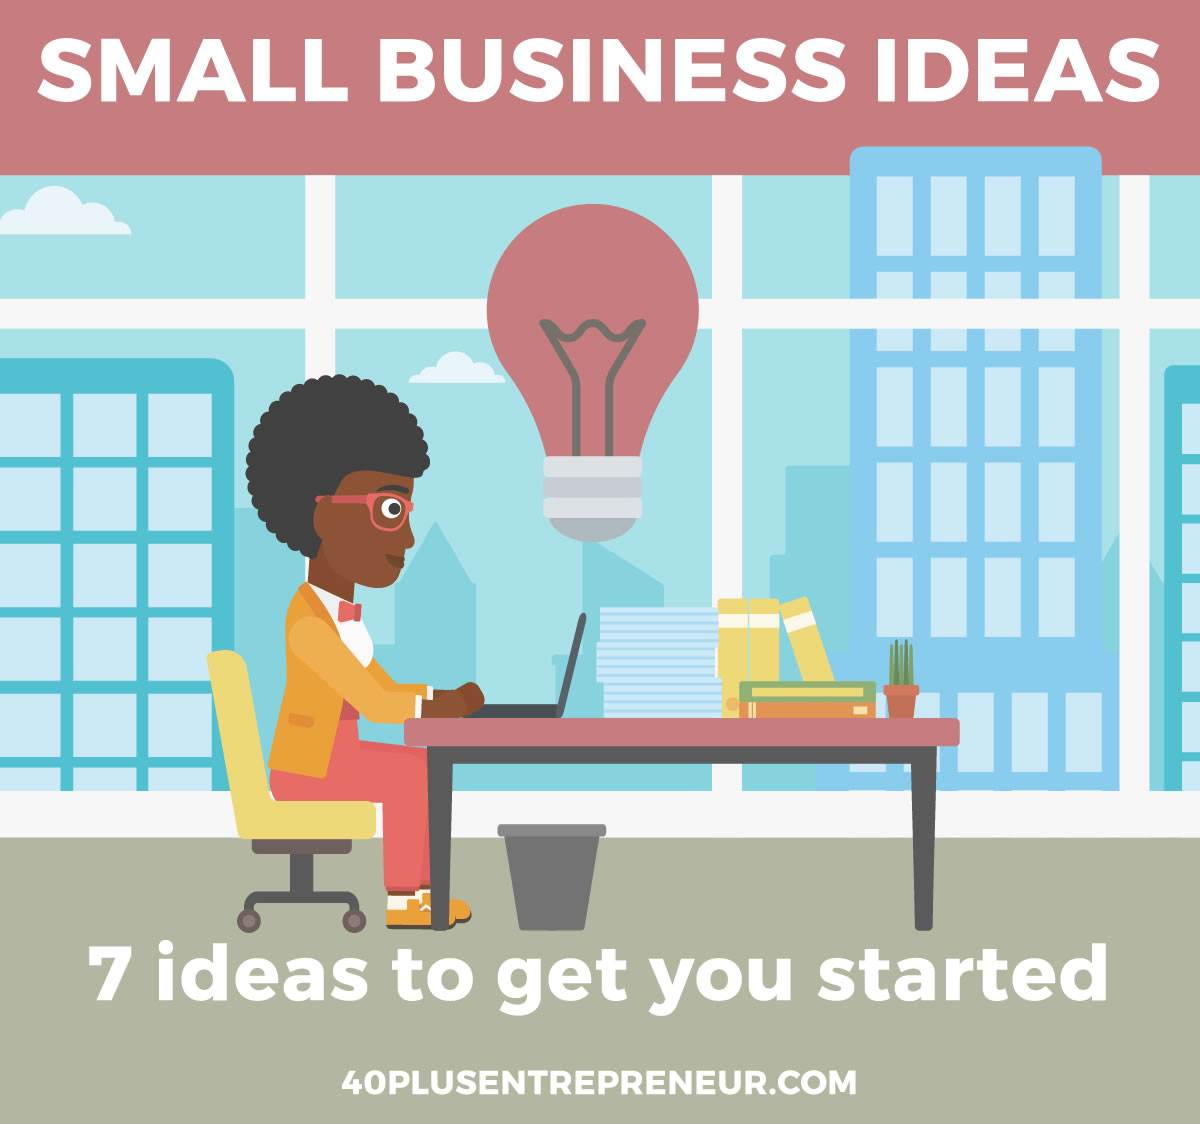 7 small business ideas to get you started in online business | truepotentialacademy.com